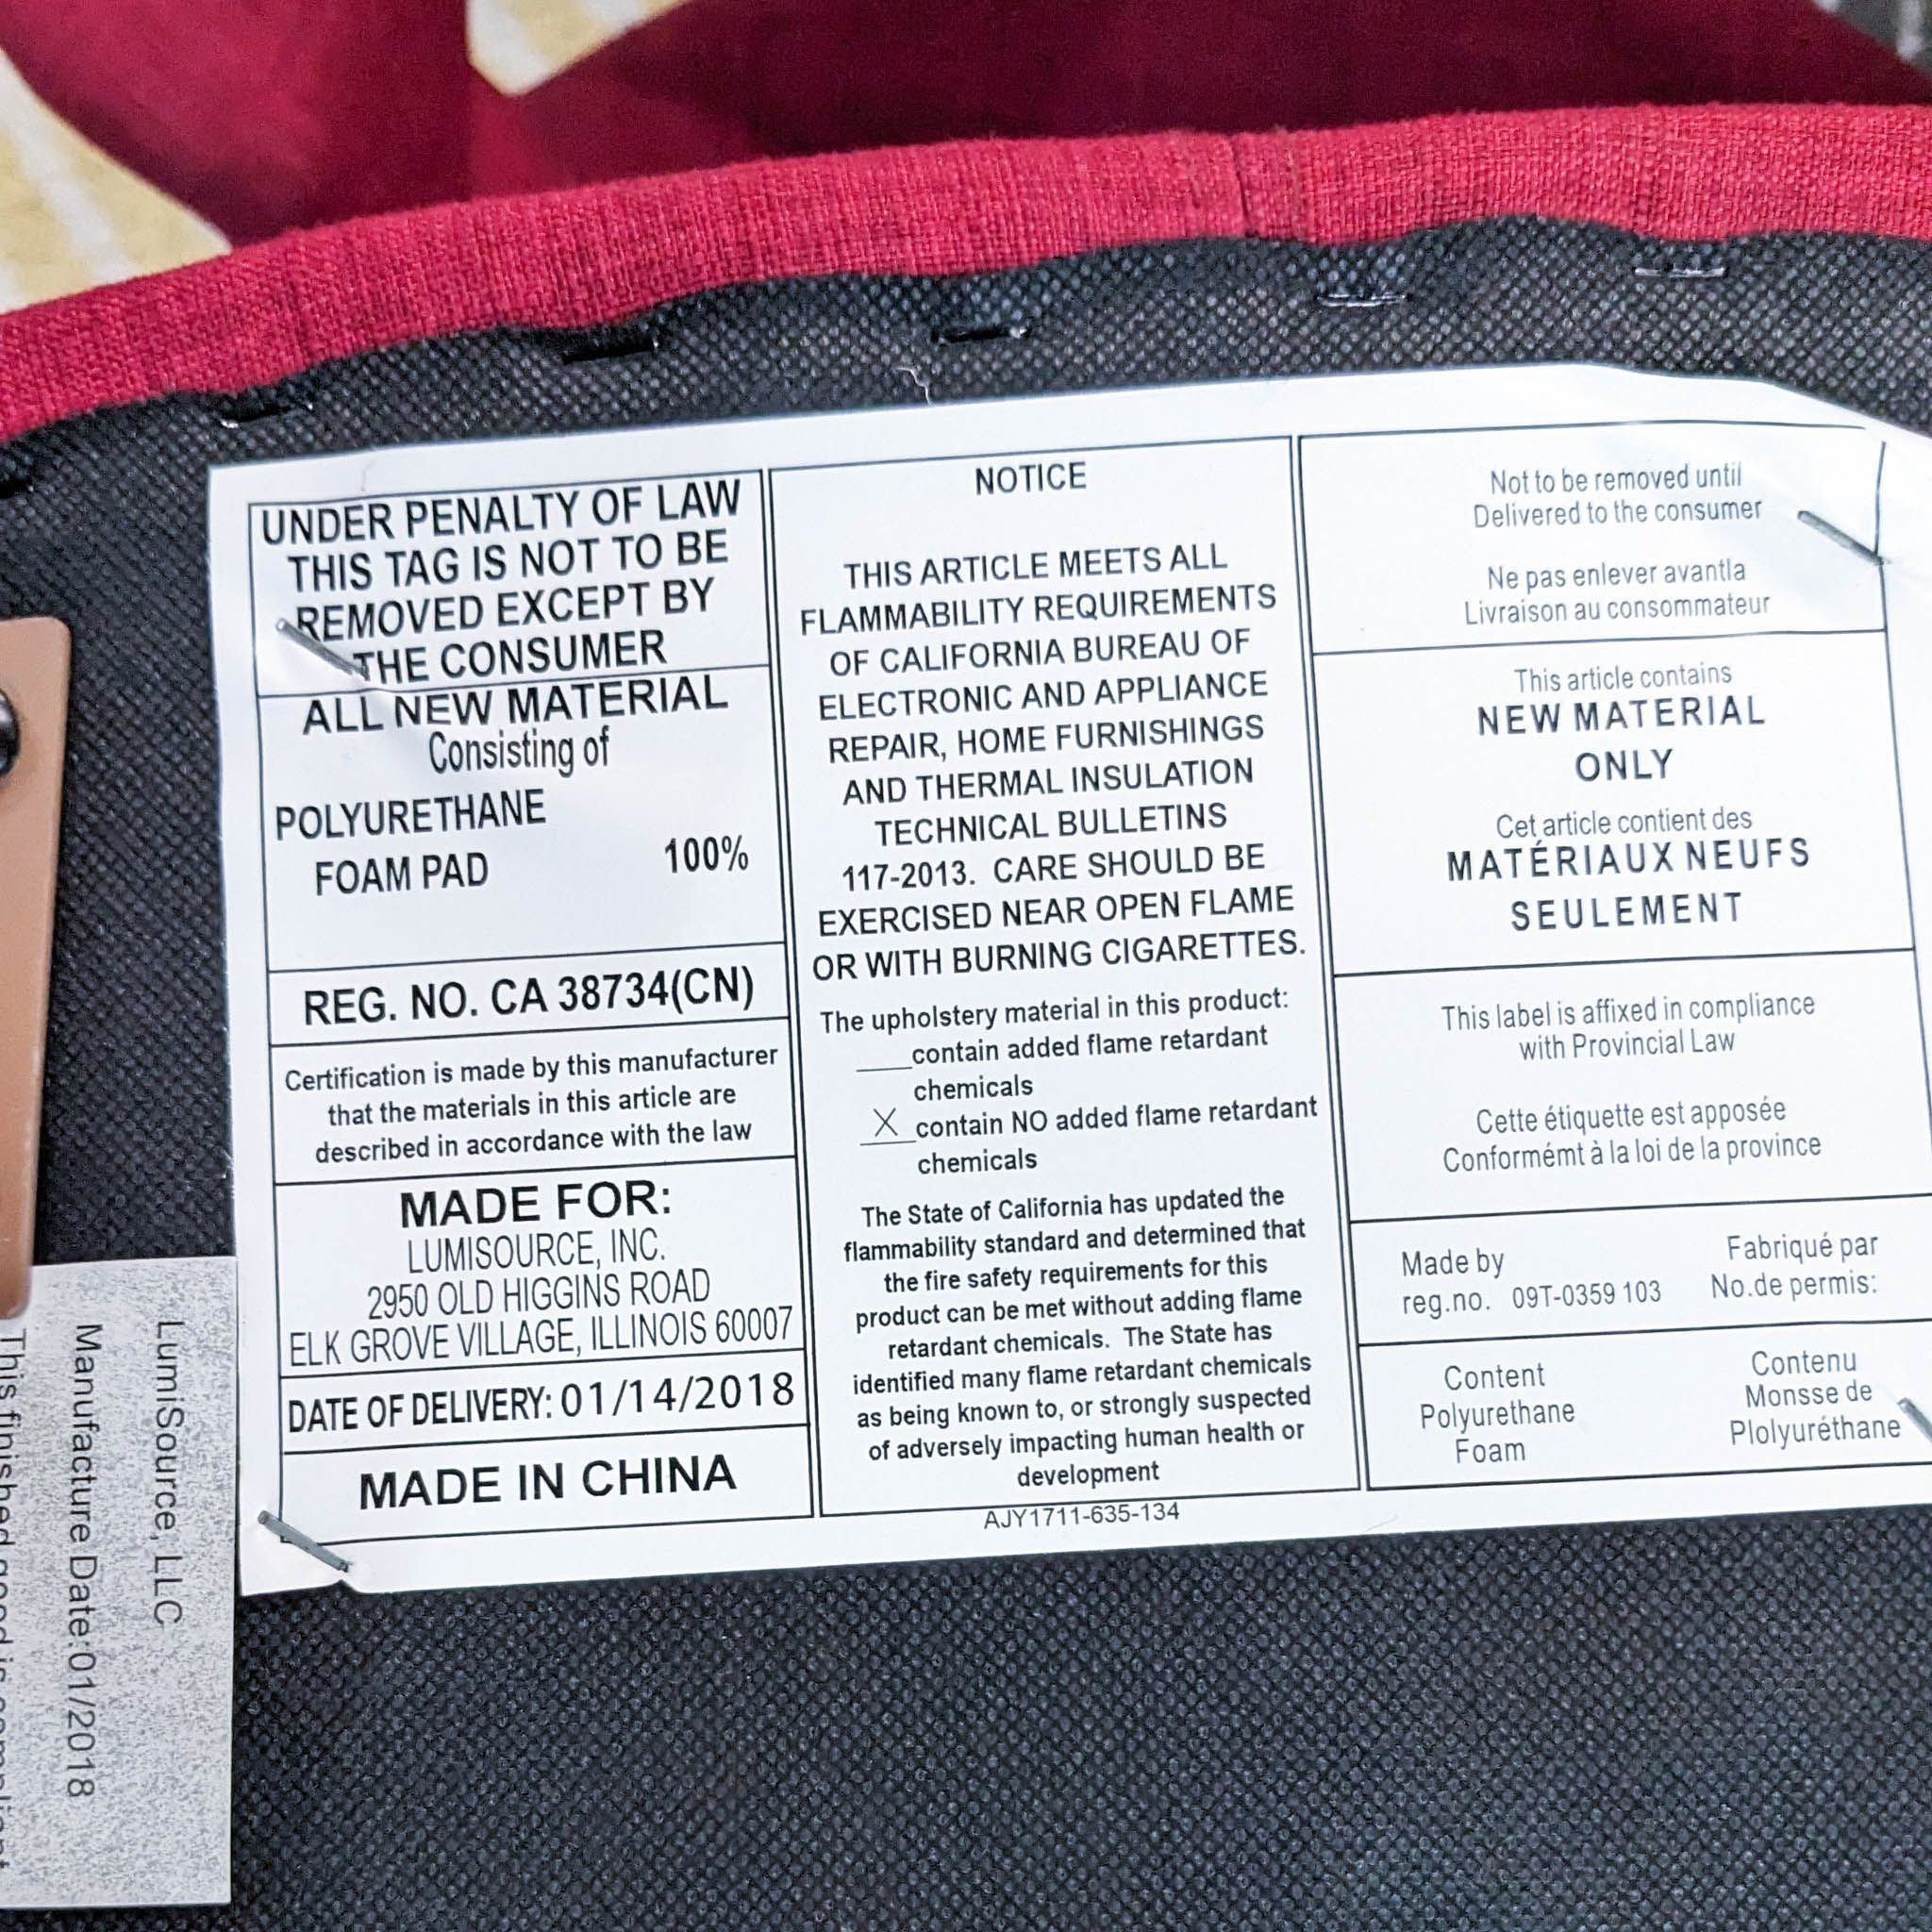 Close-up of a warning and material information label on a Vintage Flair Chair by LumiSource, indicating it's made of 100% polyurethane foam and meets flammability requirements.